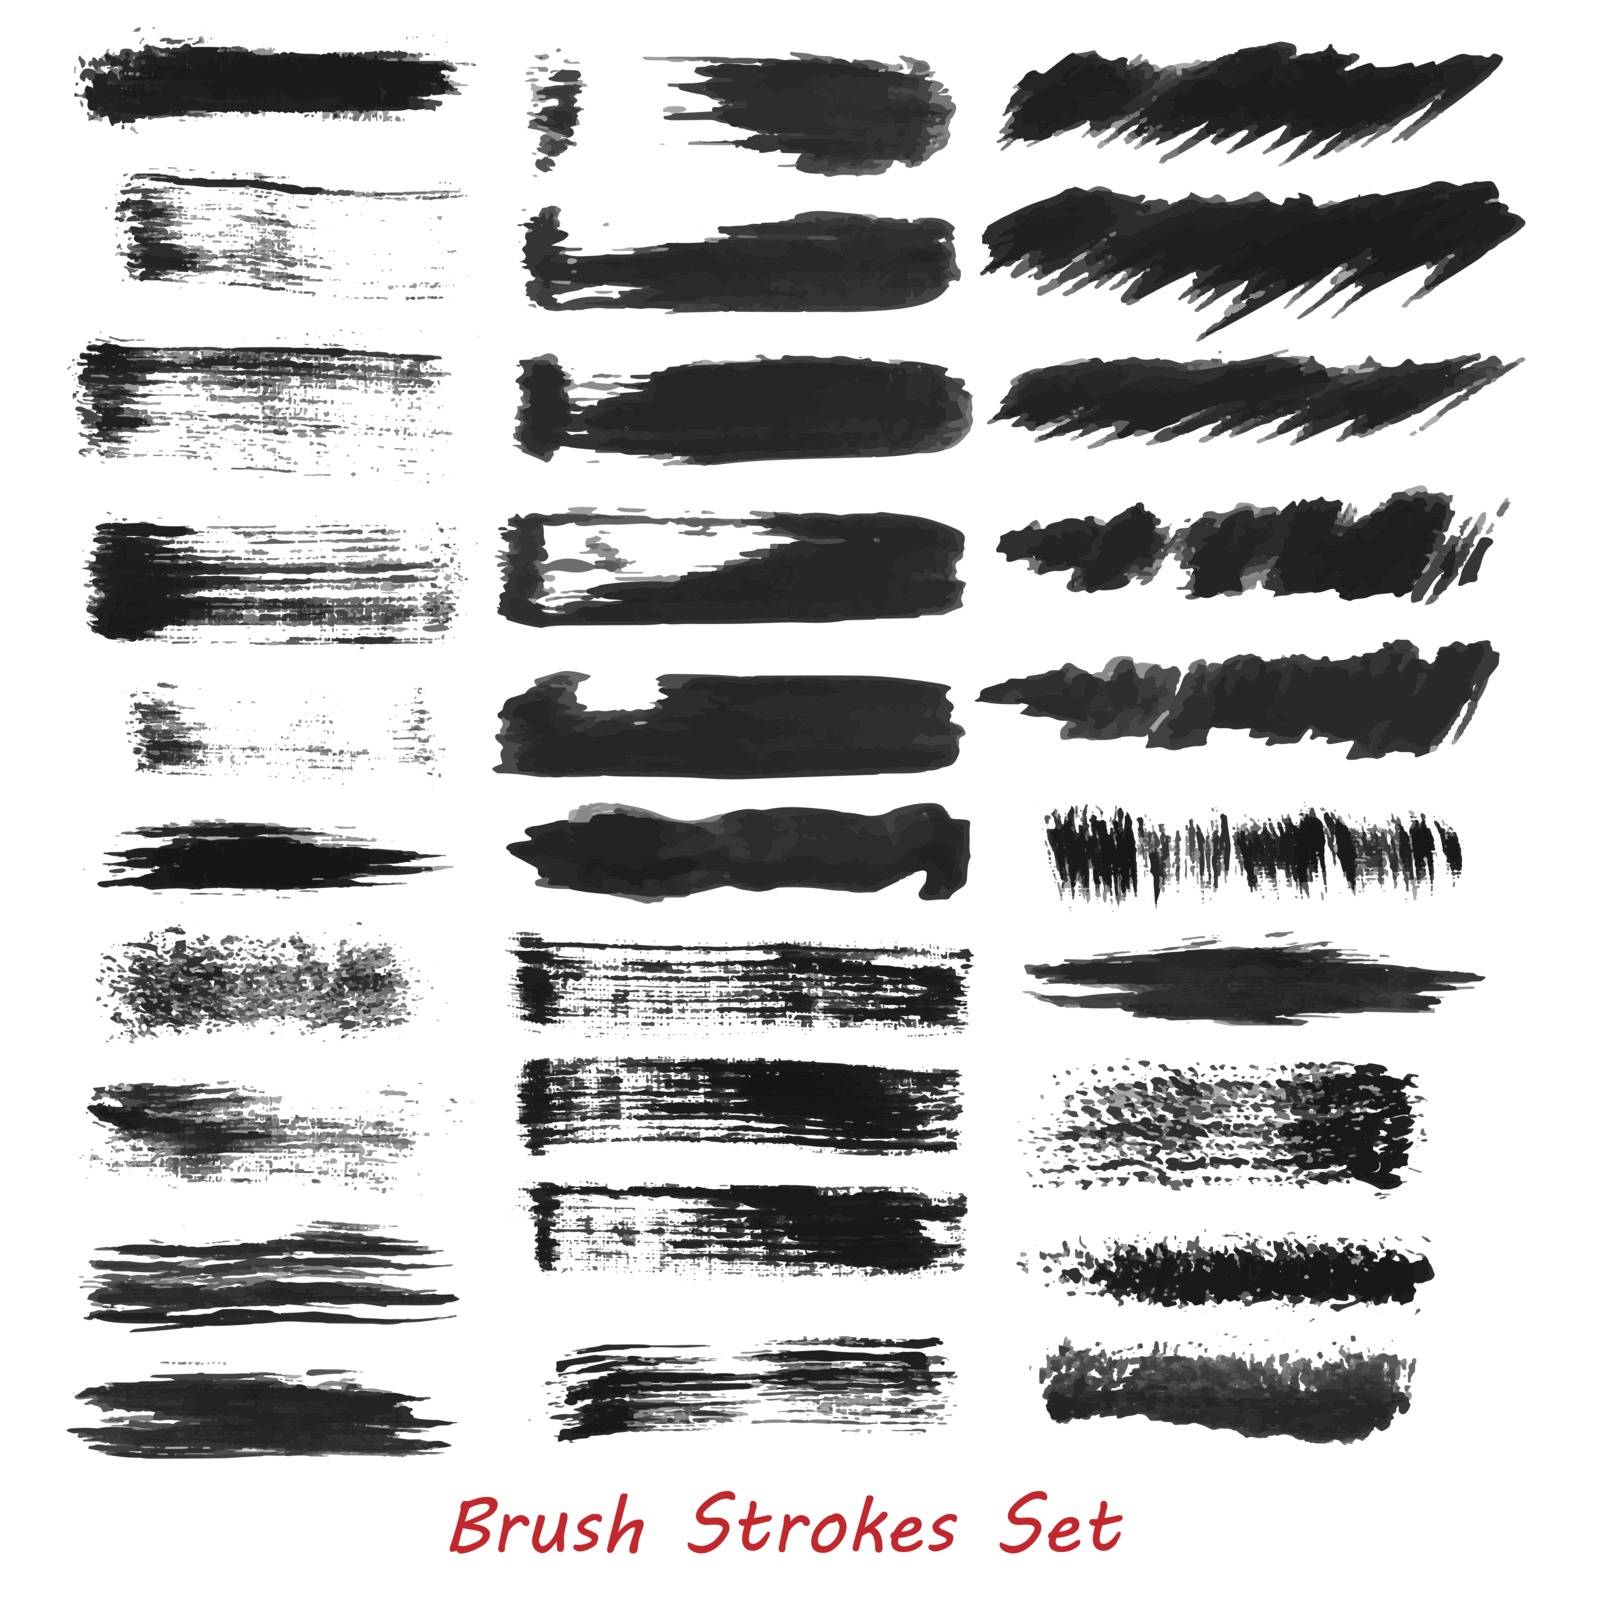 Grungy brush strokes set over white background. Hand drawn grunge. Elements for your work and design. Eps10